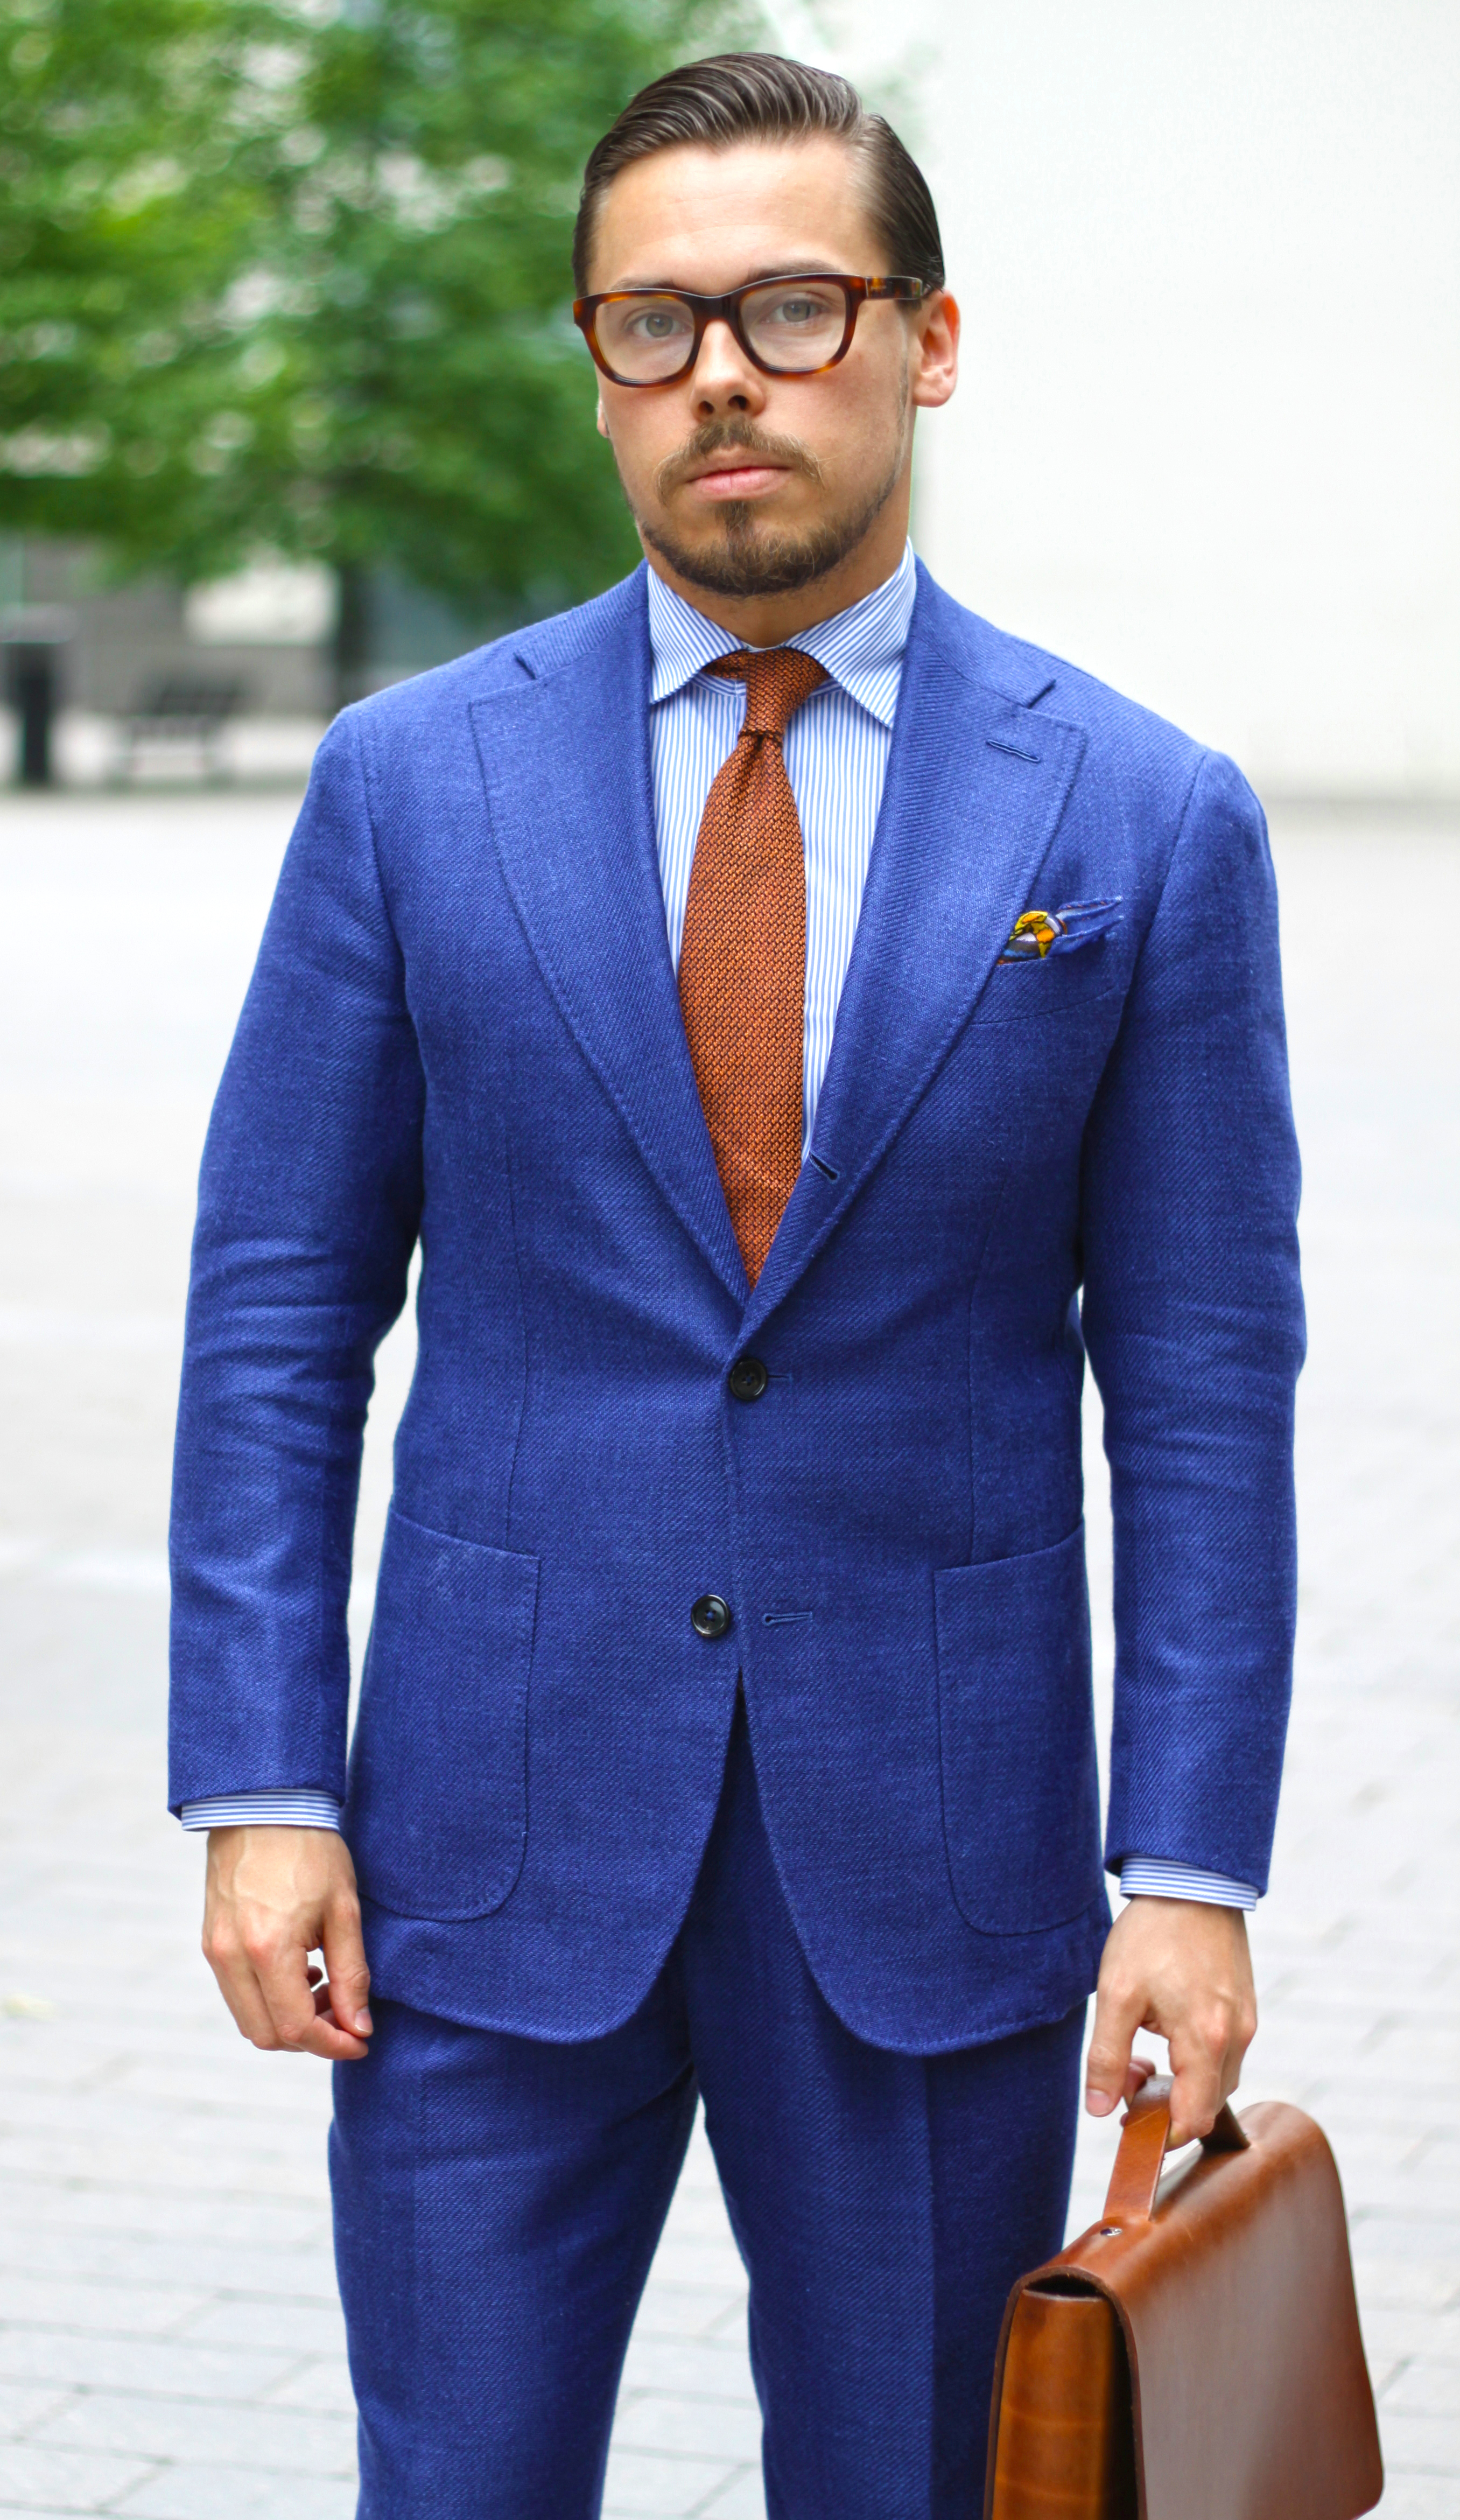 Blue Suit matched with an orange tie